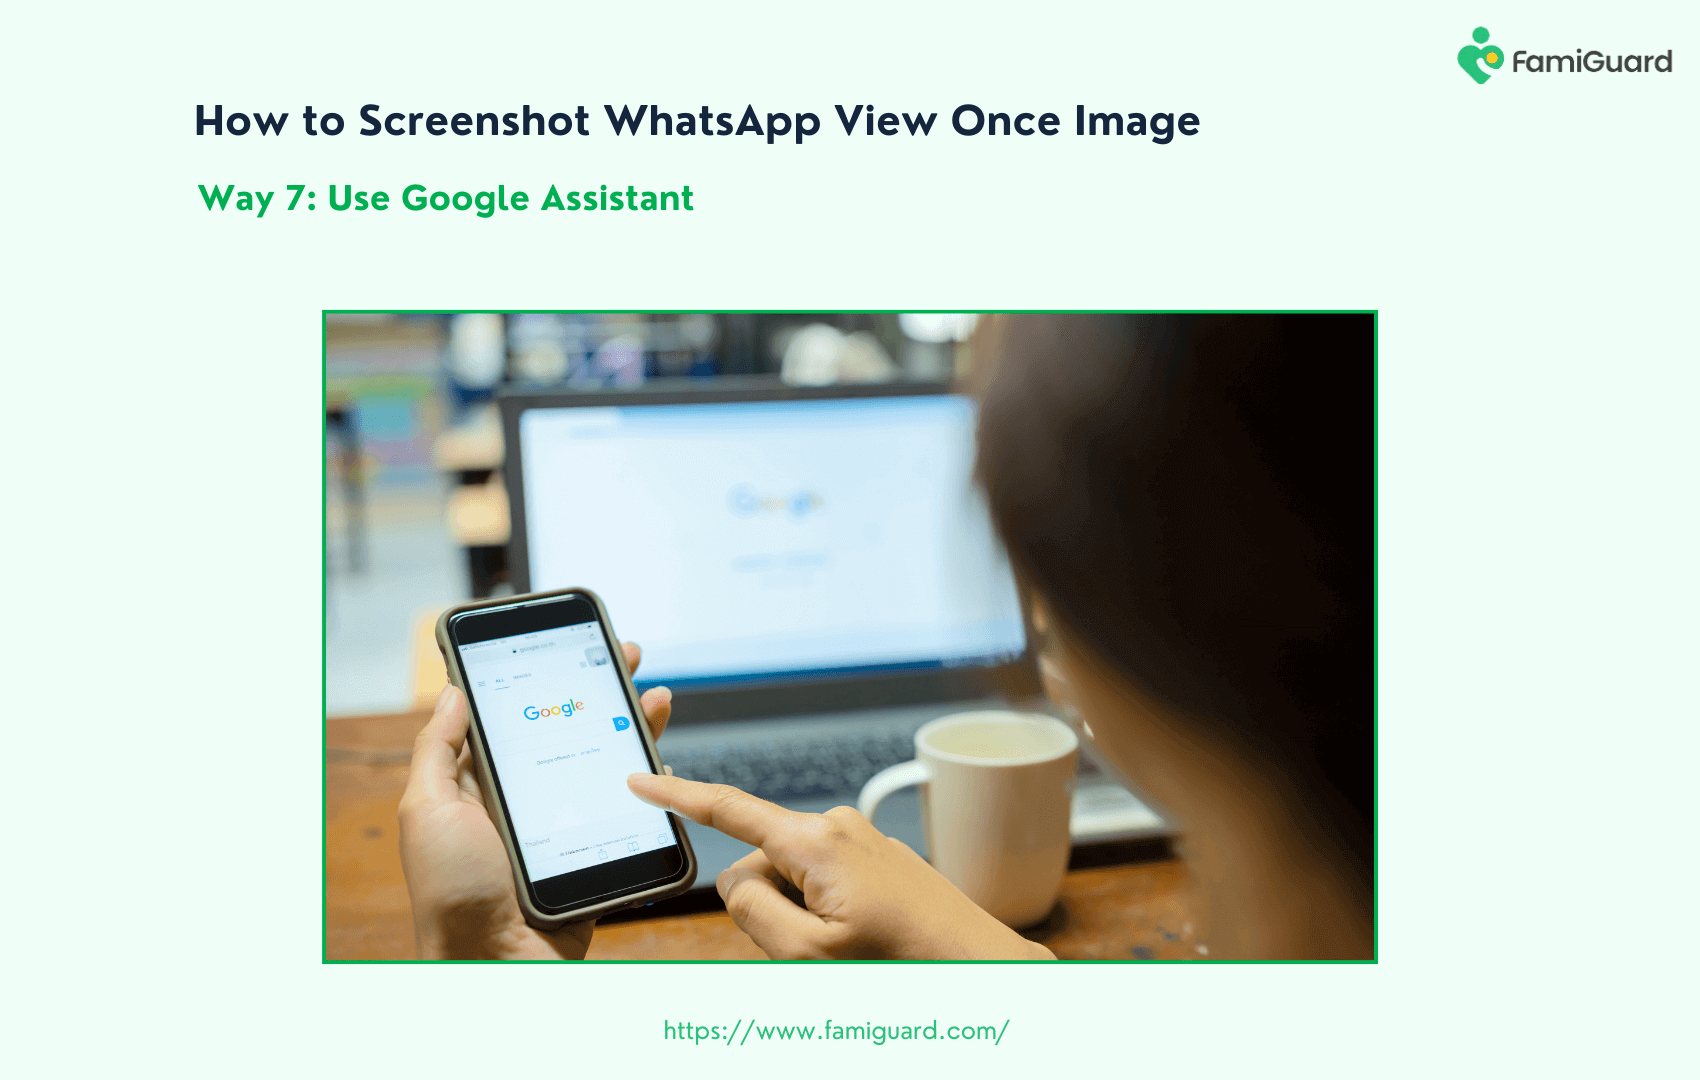 Use Google Assistant to Screenshot WhatsApp View Once Image